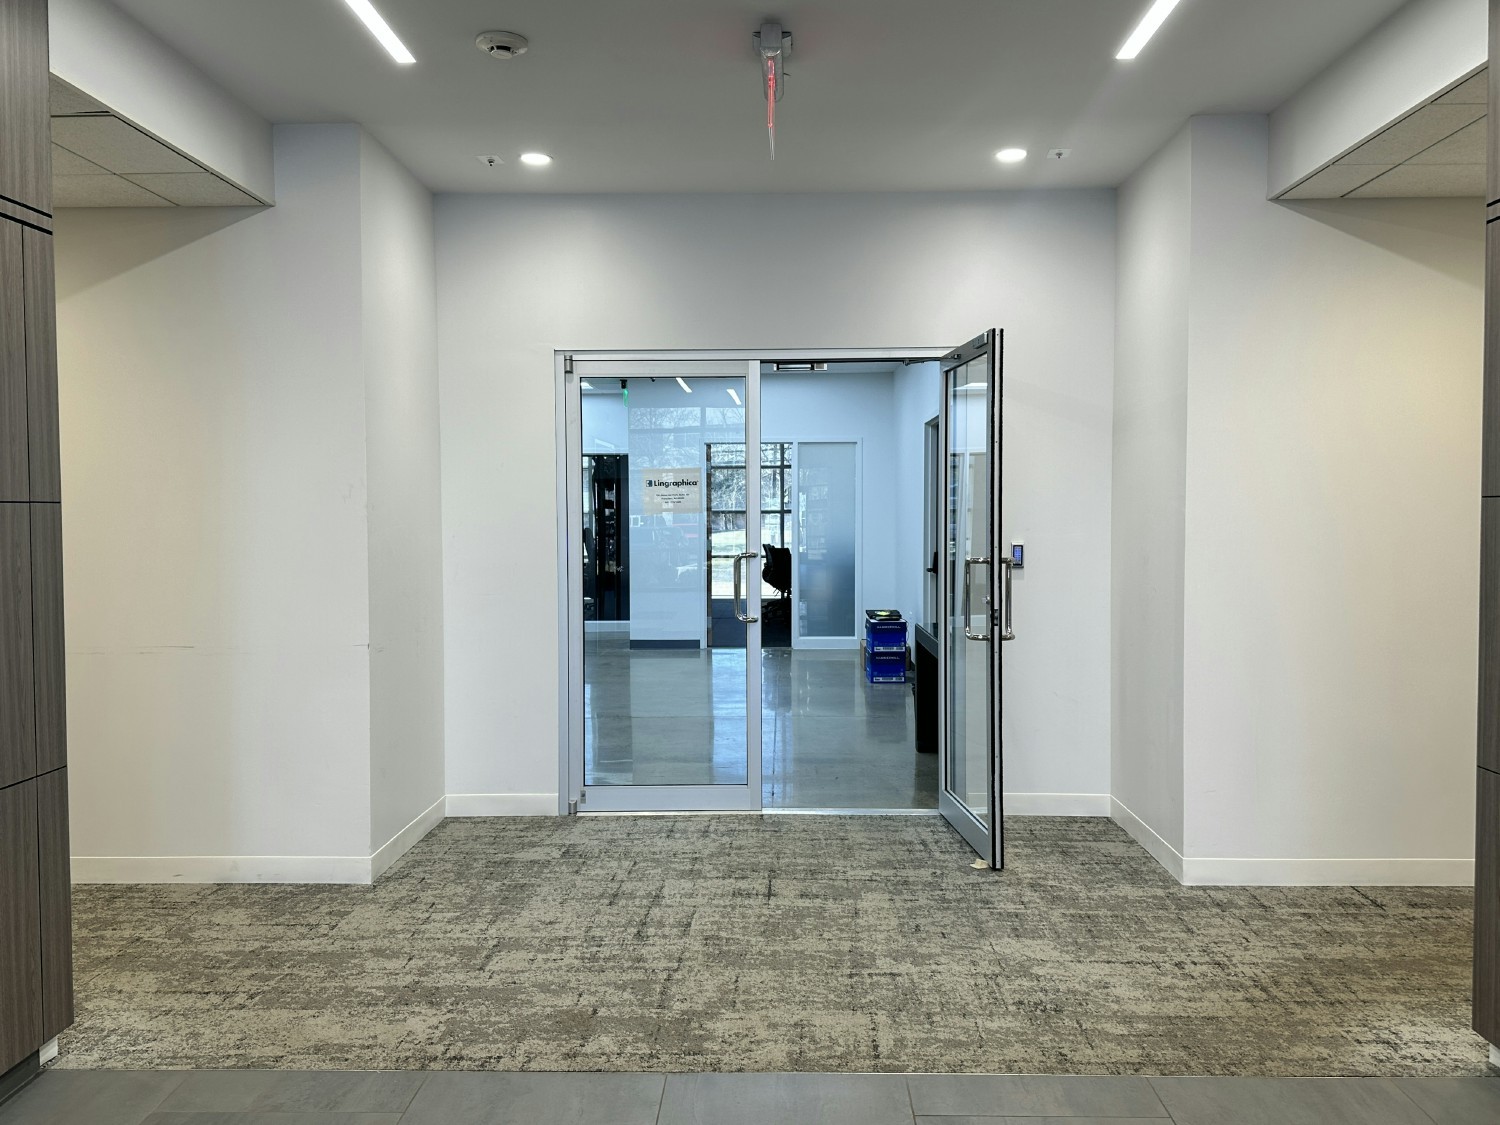 New office entrance